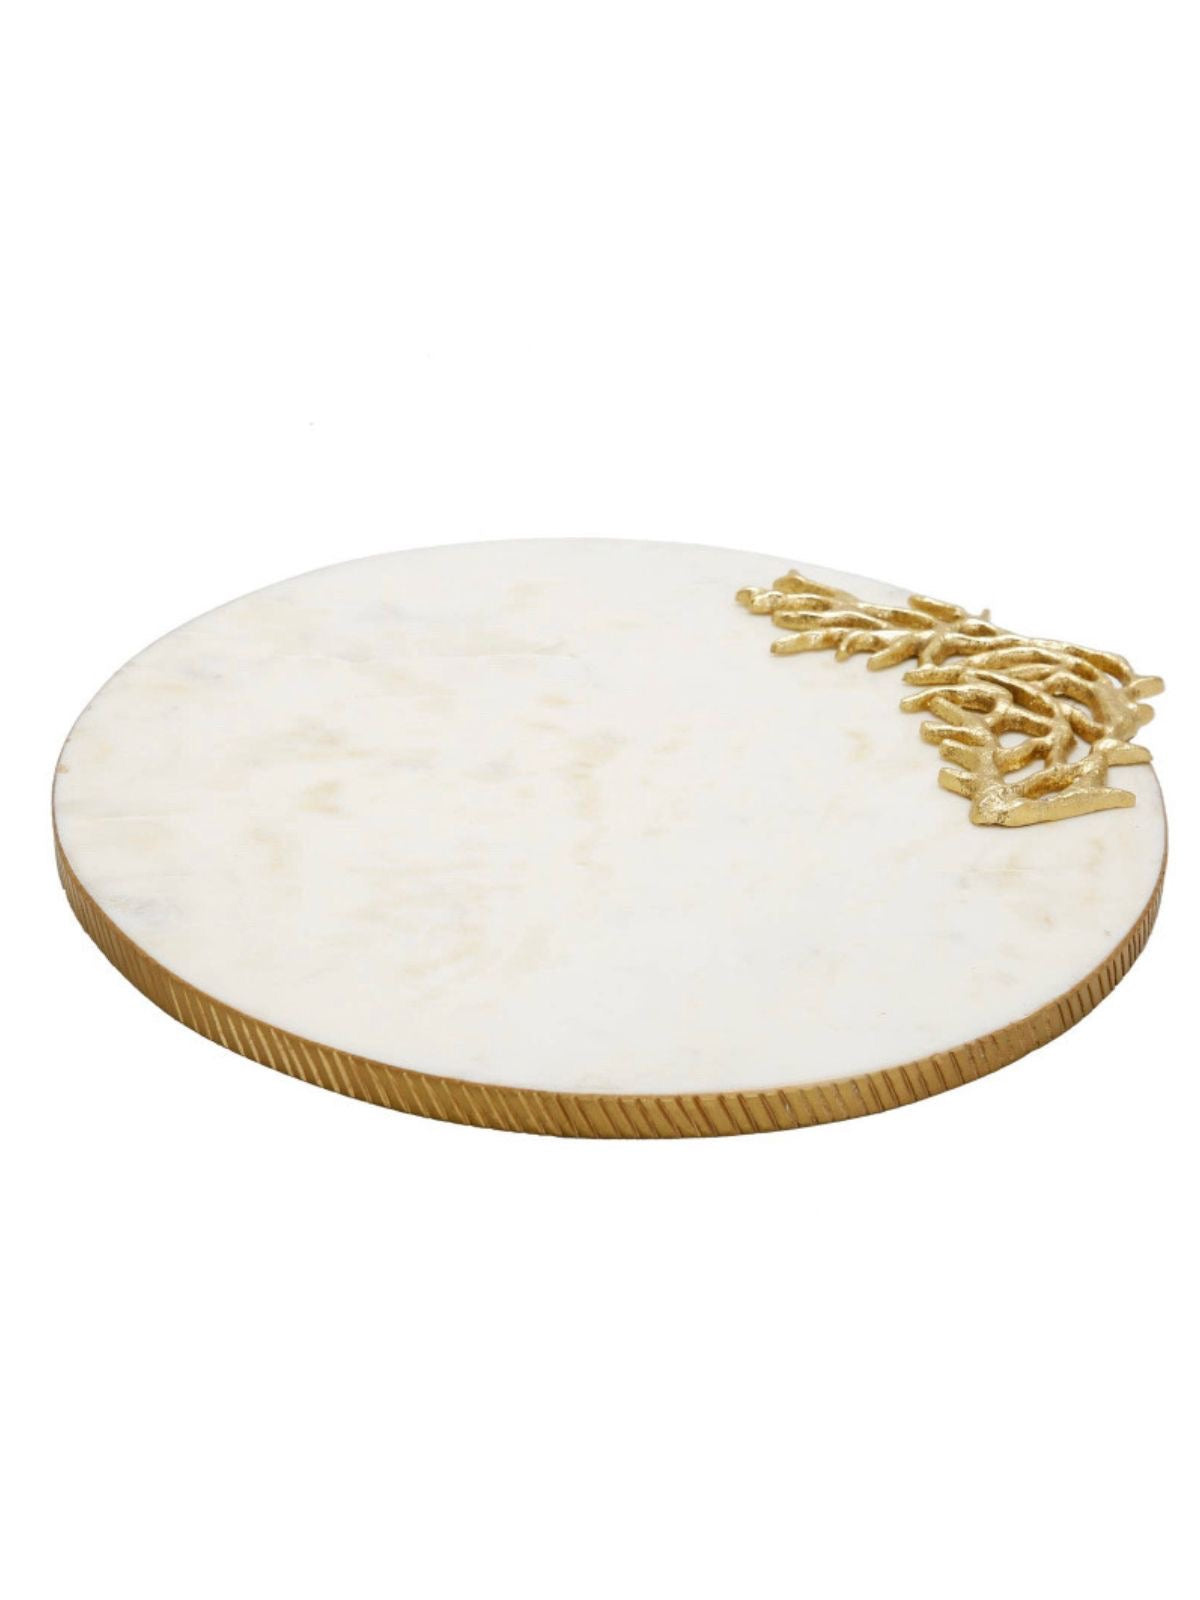 The Nicole Marble round marble tray is perfect to use as a charcuterie board or serving platter. Place candles on or use to style any vignette in your home!